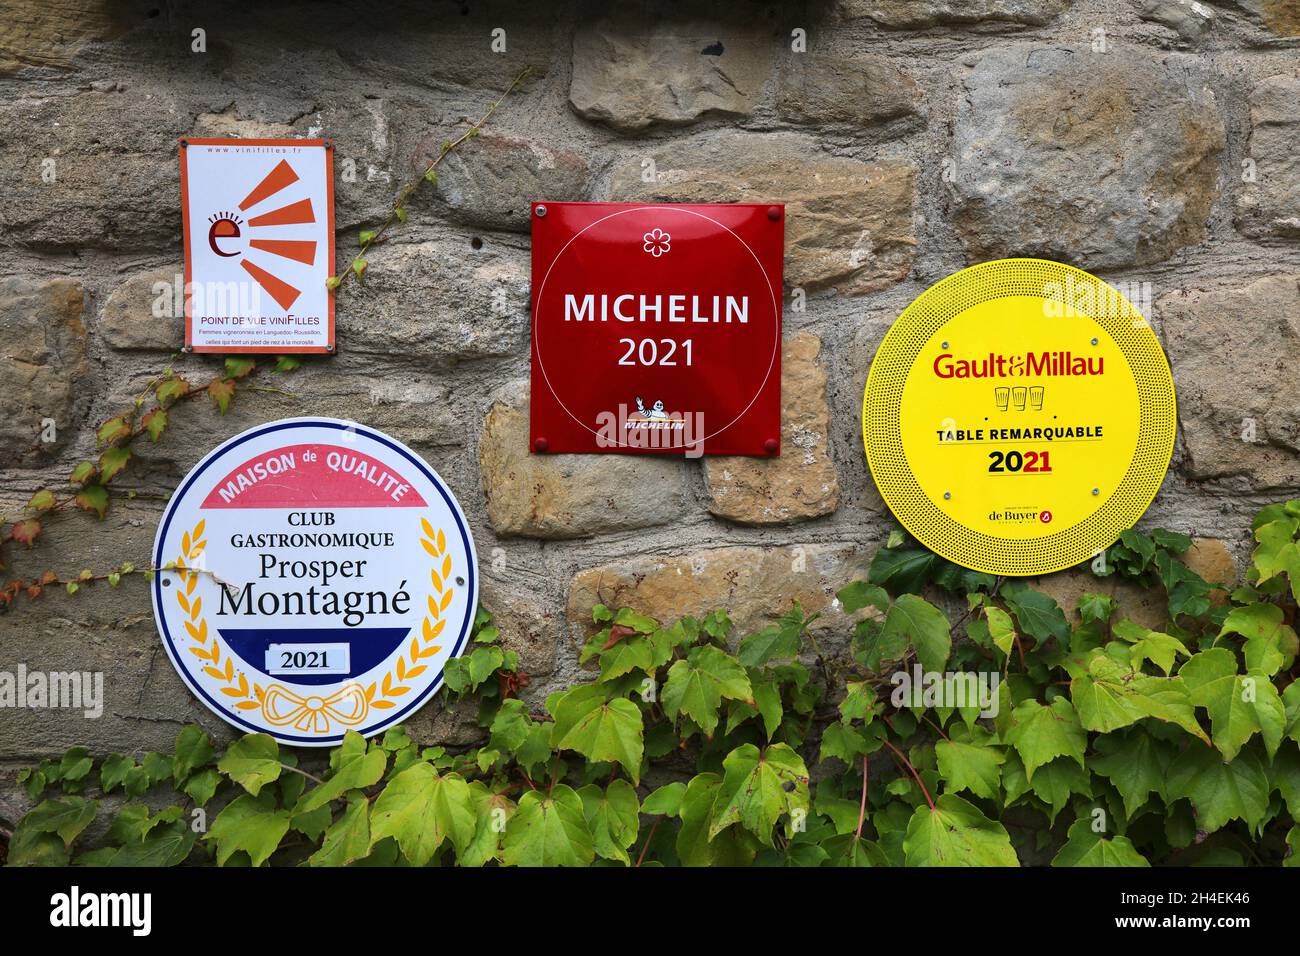 CARCASSONNE, FRANCE - OCTOBER 4, 2021: Signs on a local restaurant in Carcassonne with prestigious awards: Michelin Star and Gault and Millau prize. Stock Photo